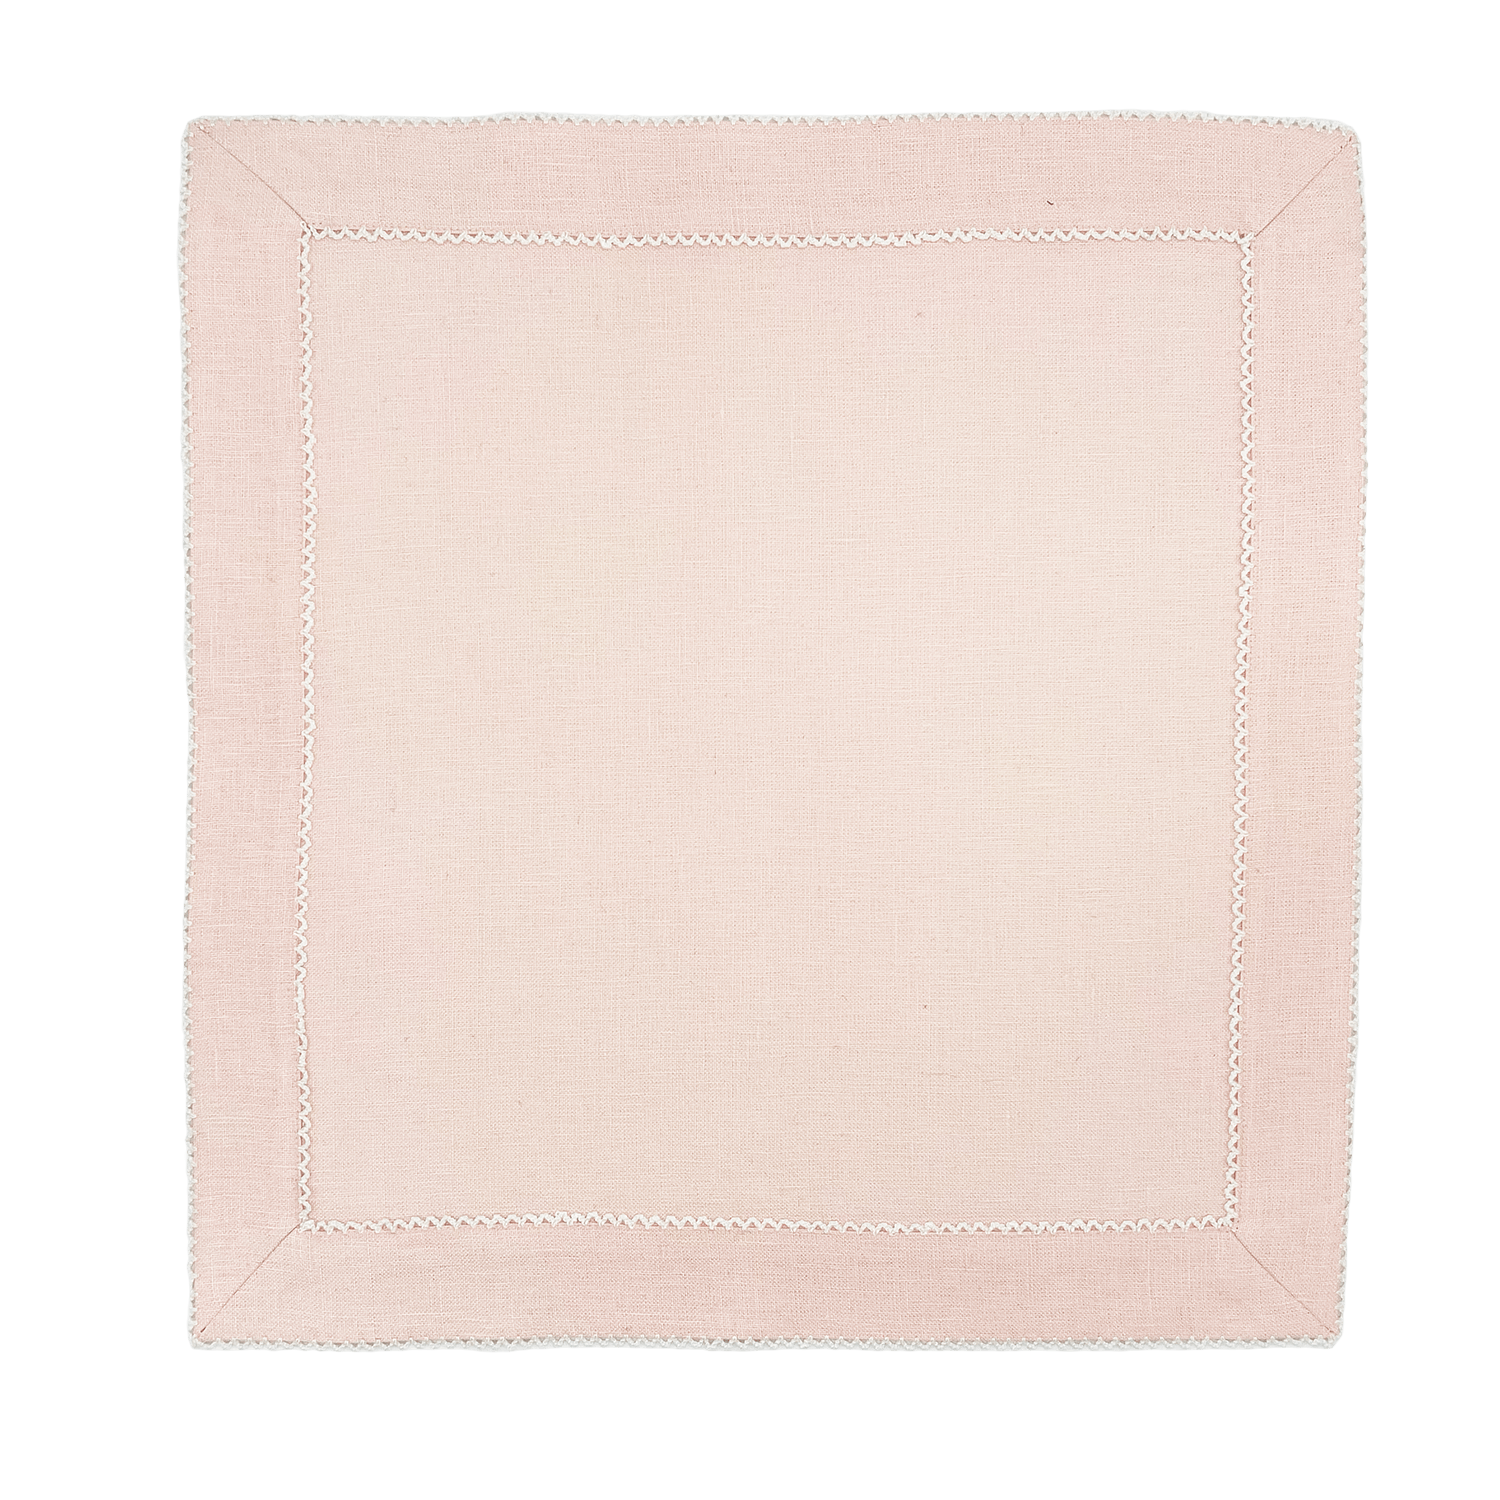 PE_Square_SoftPink.png